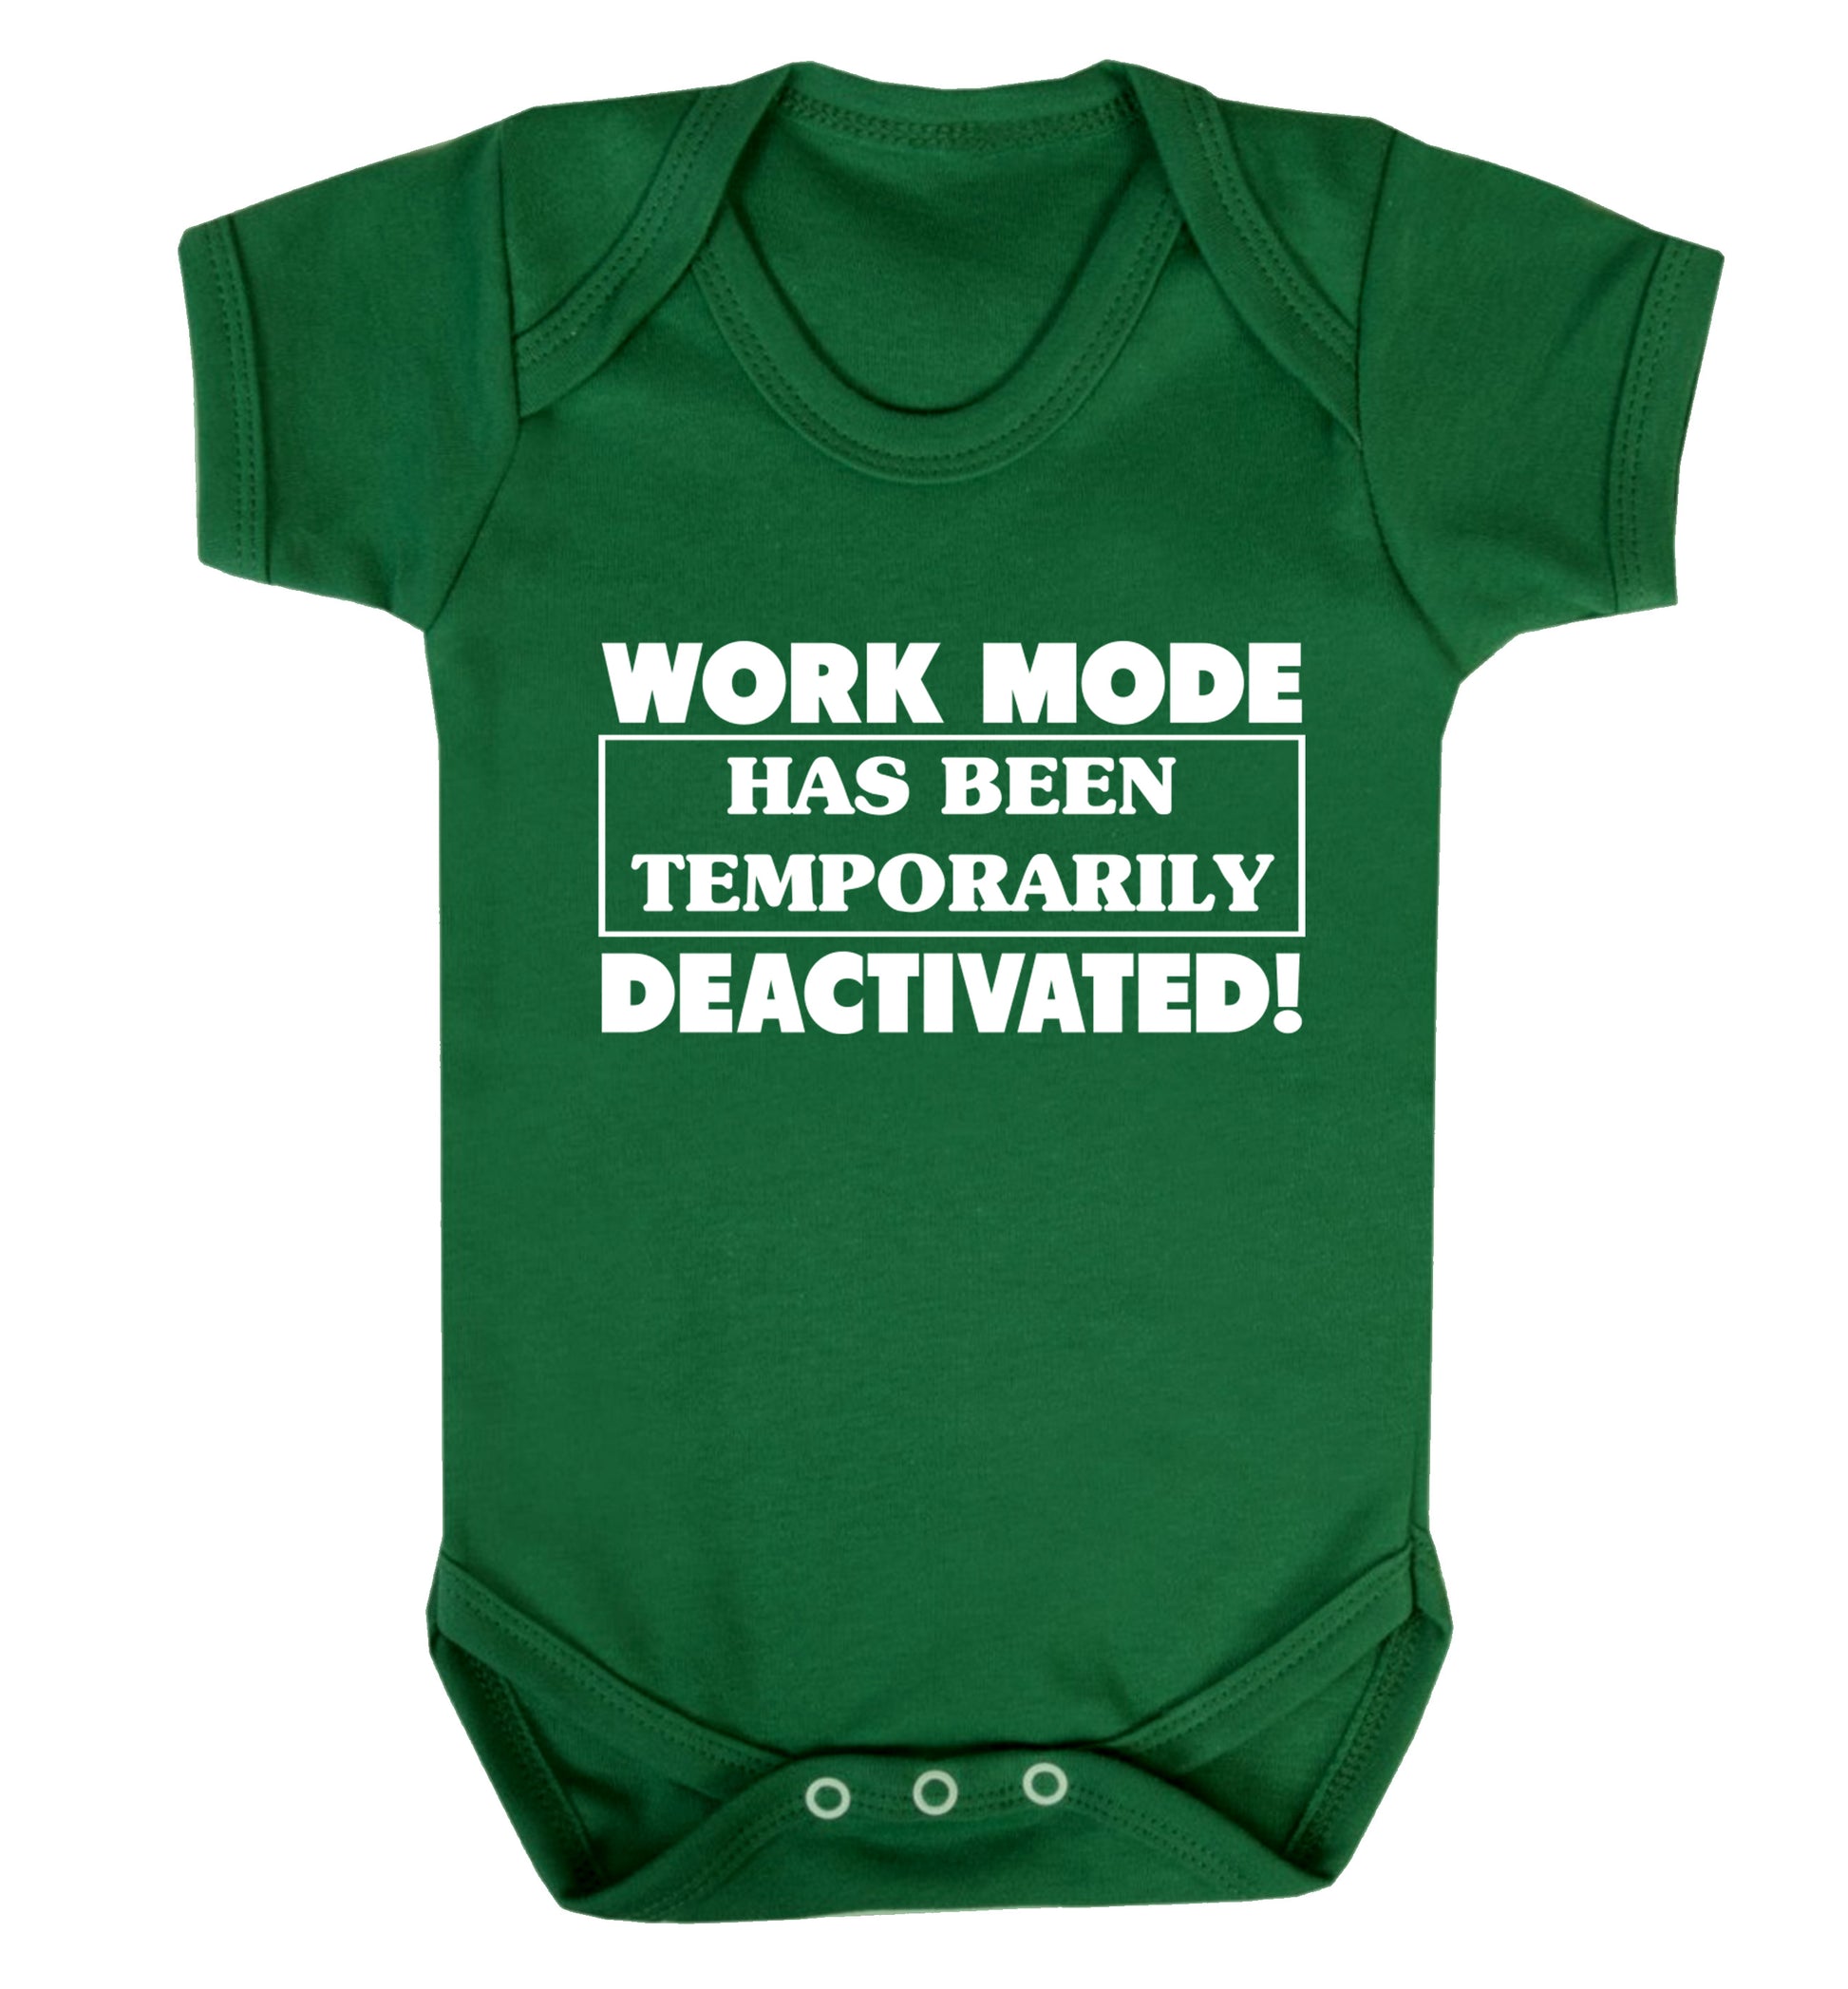 Work mode has now been temporarily deactivated Baby Vest green 18-24 months